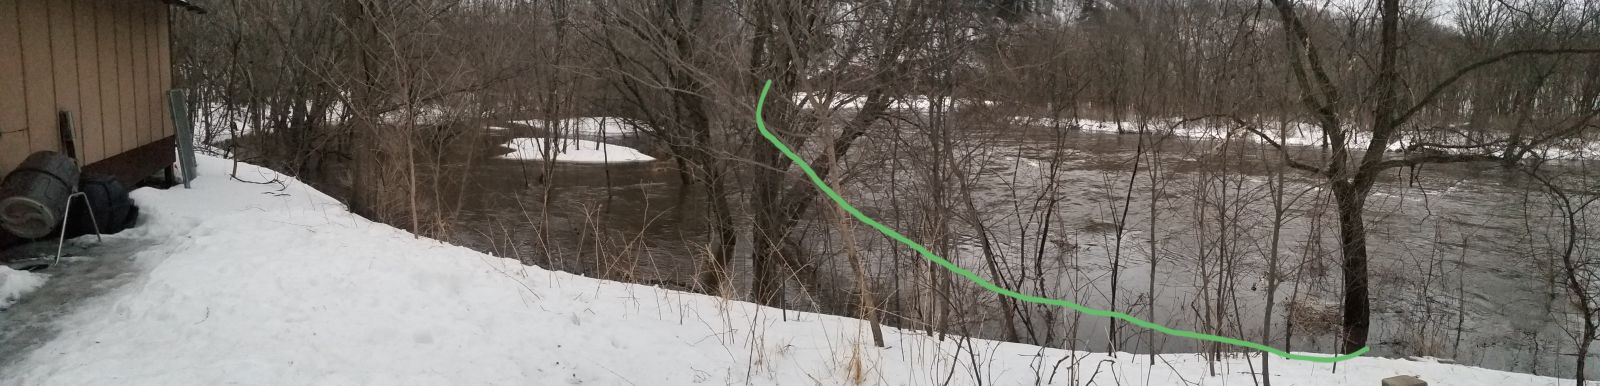 The green line is where the river usually is. I usually mow some of the area to the left of it. Some spots of this are over 4ft deep now I think. Not going to find out.